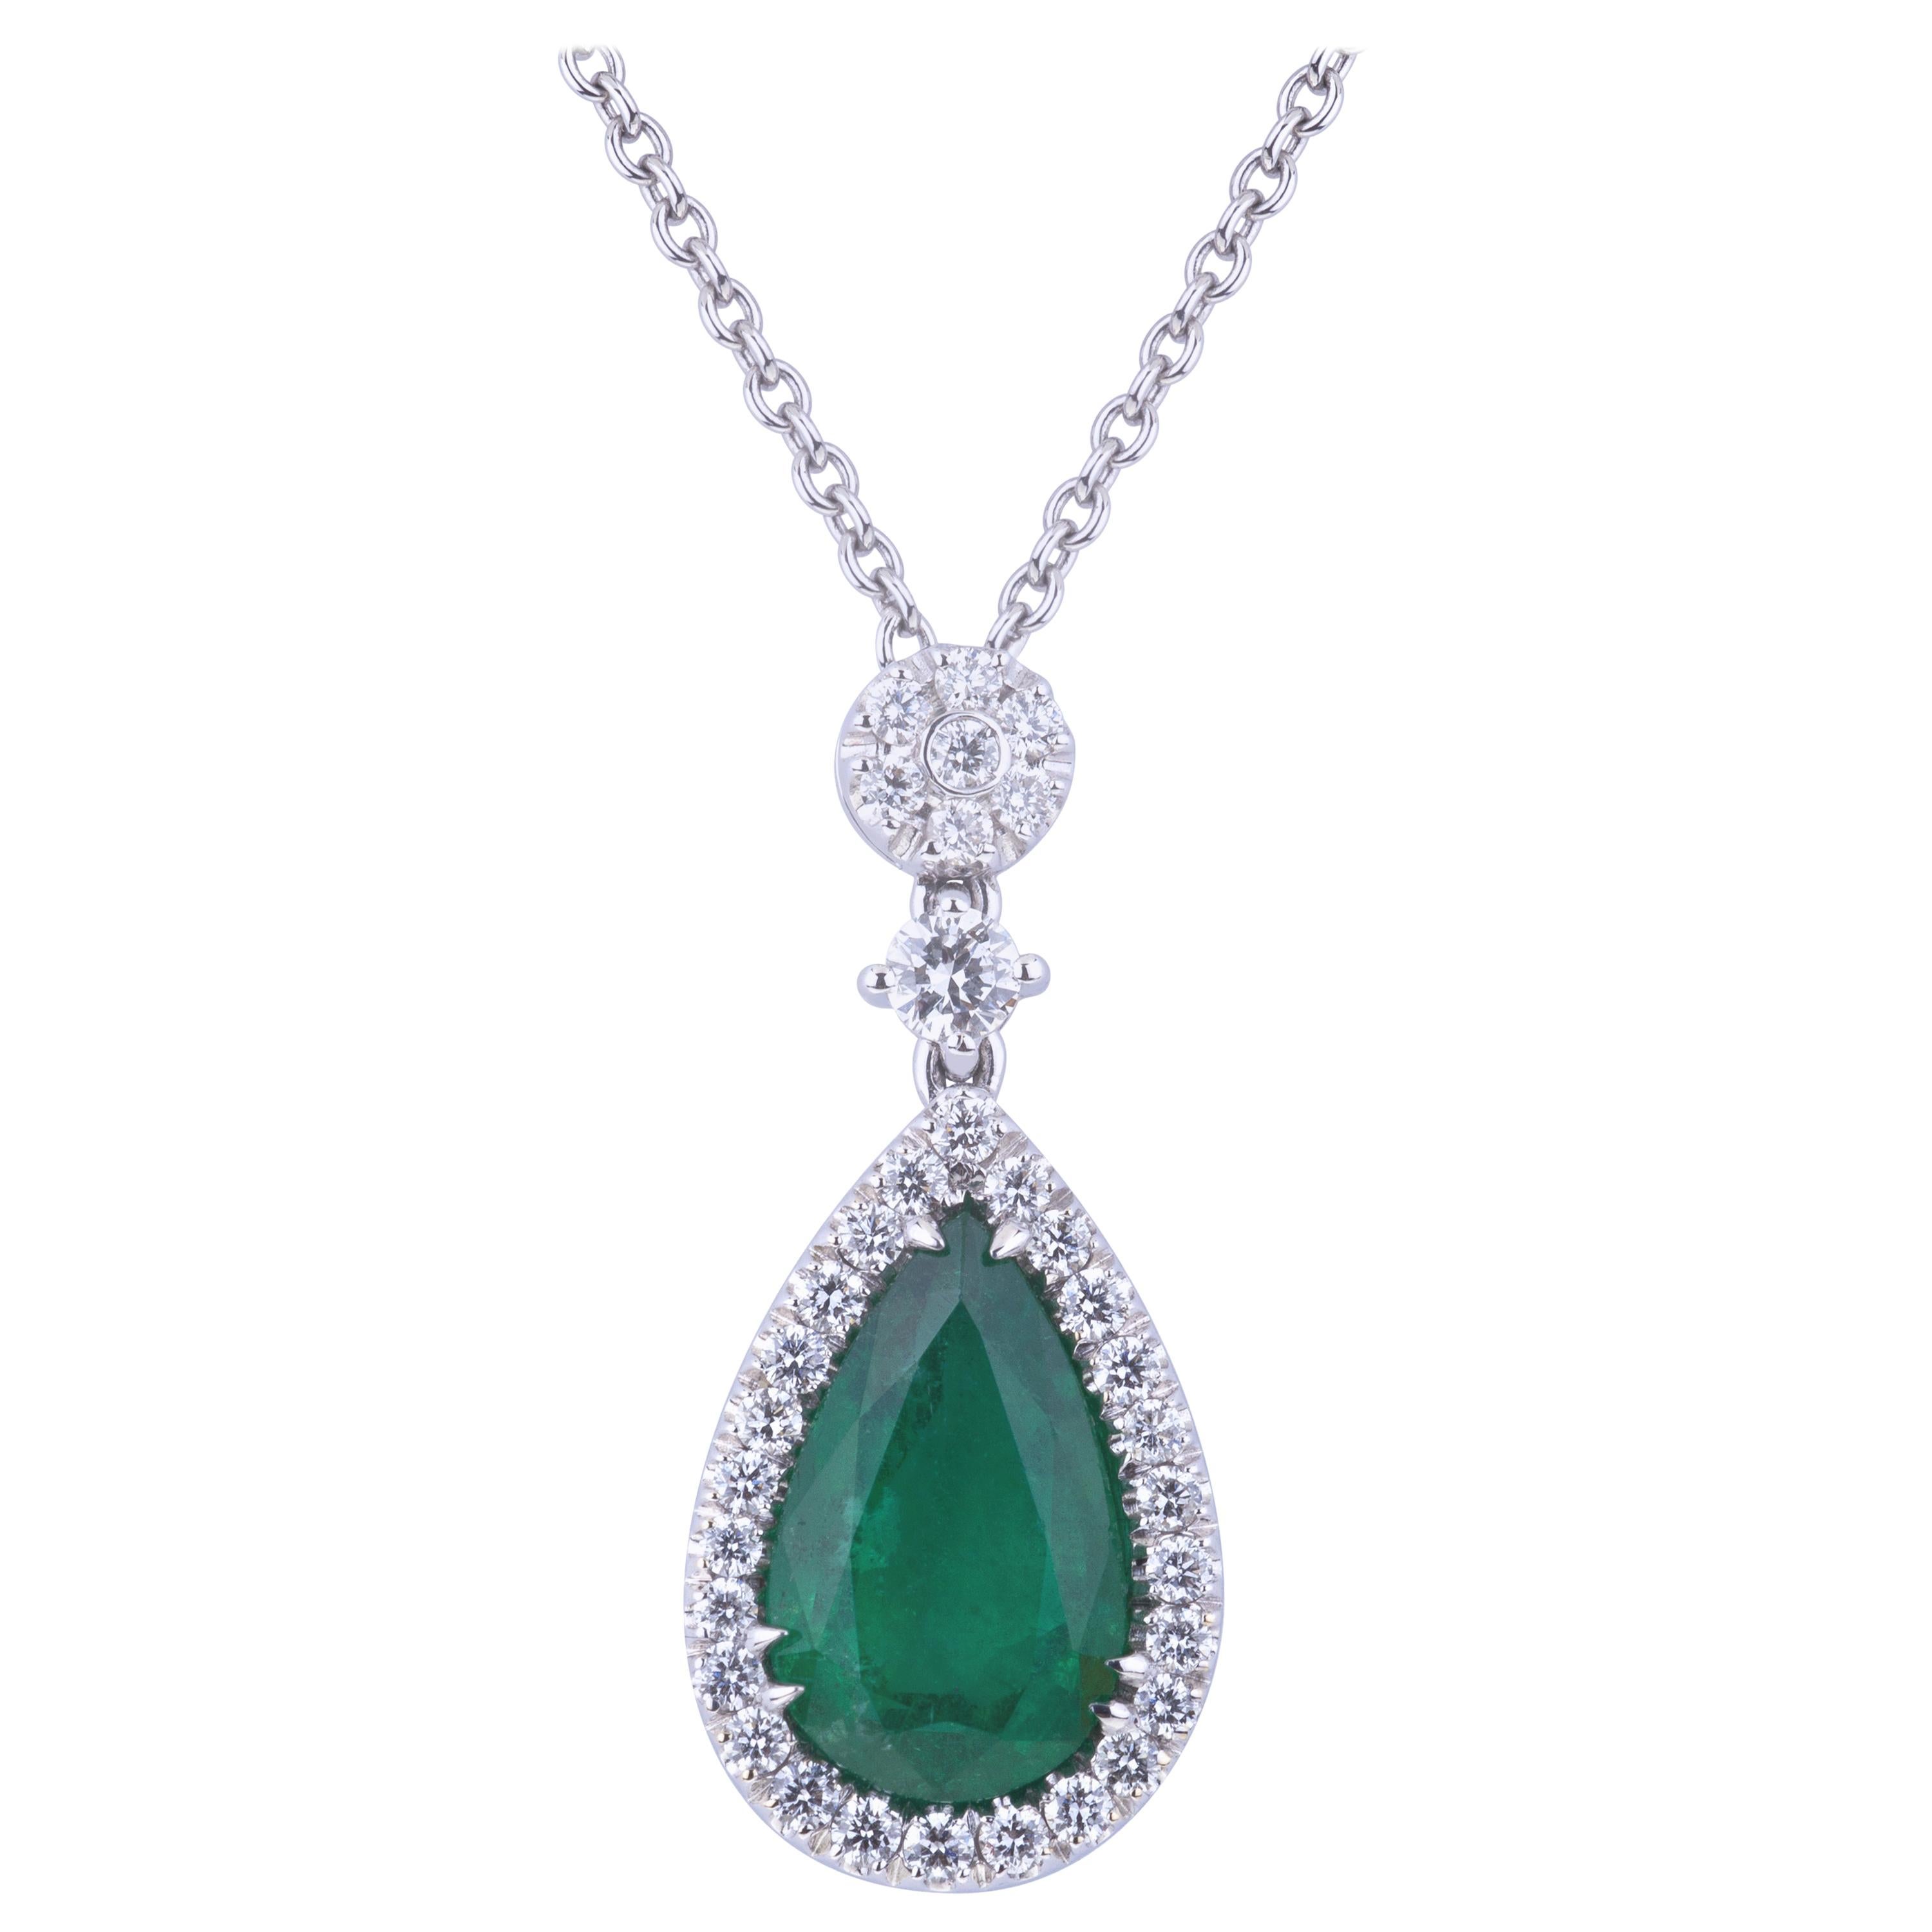 Pendant Drop Certified Emerald Necklace with Diamonds on Top and Chain